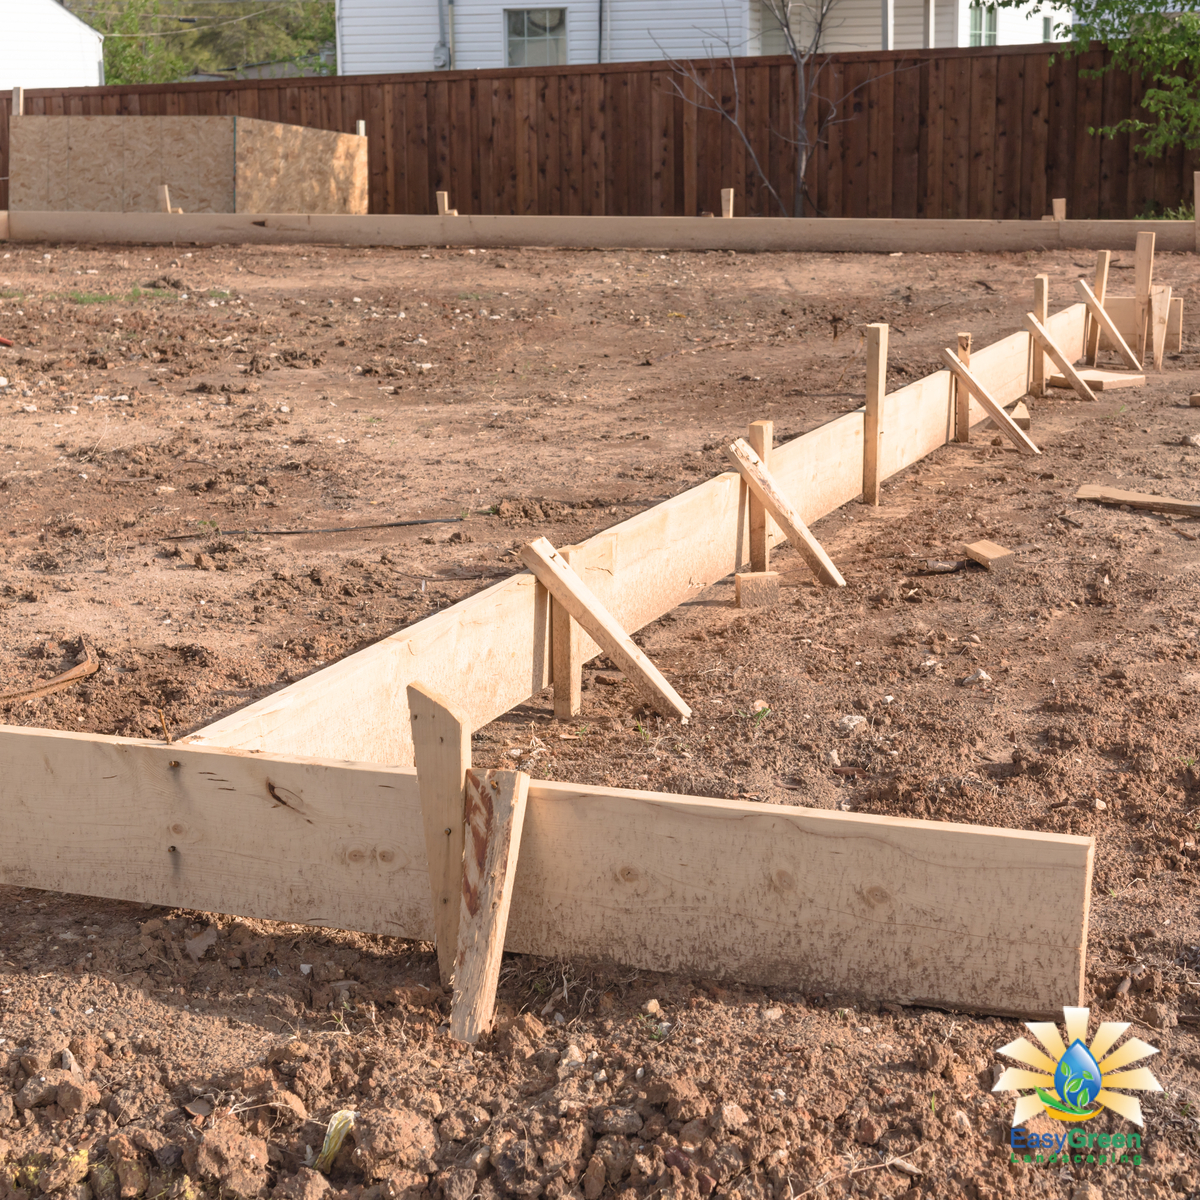 Are You Looking For A Foundation Installation Contractor In Kenmore?